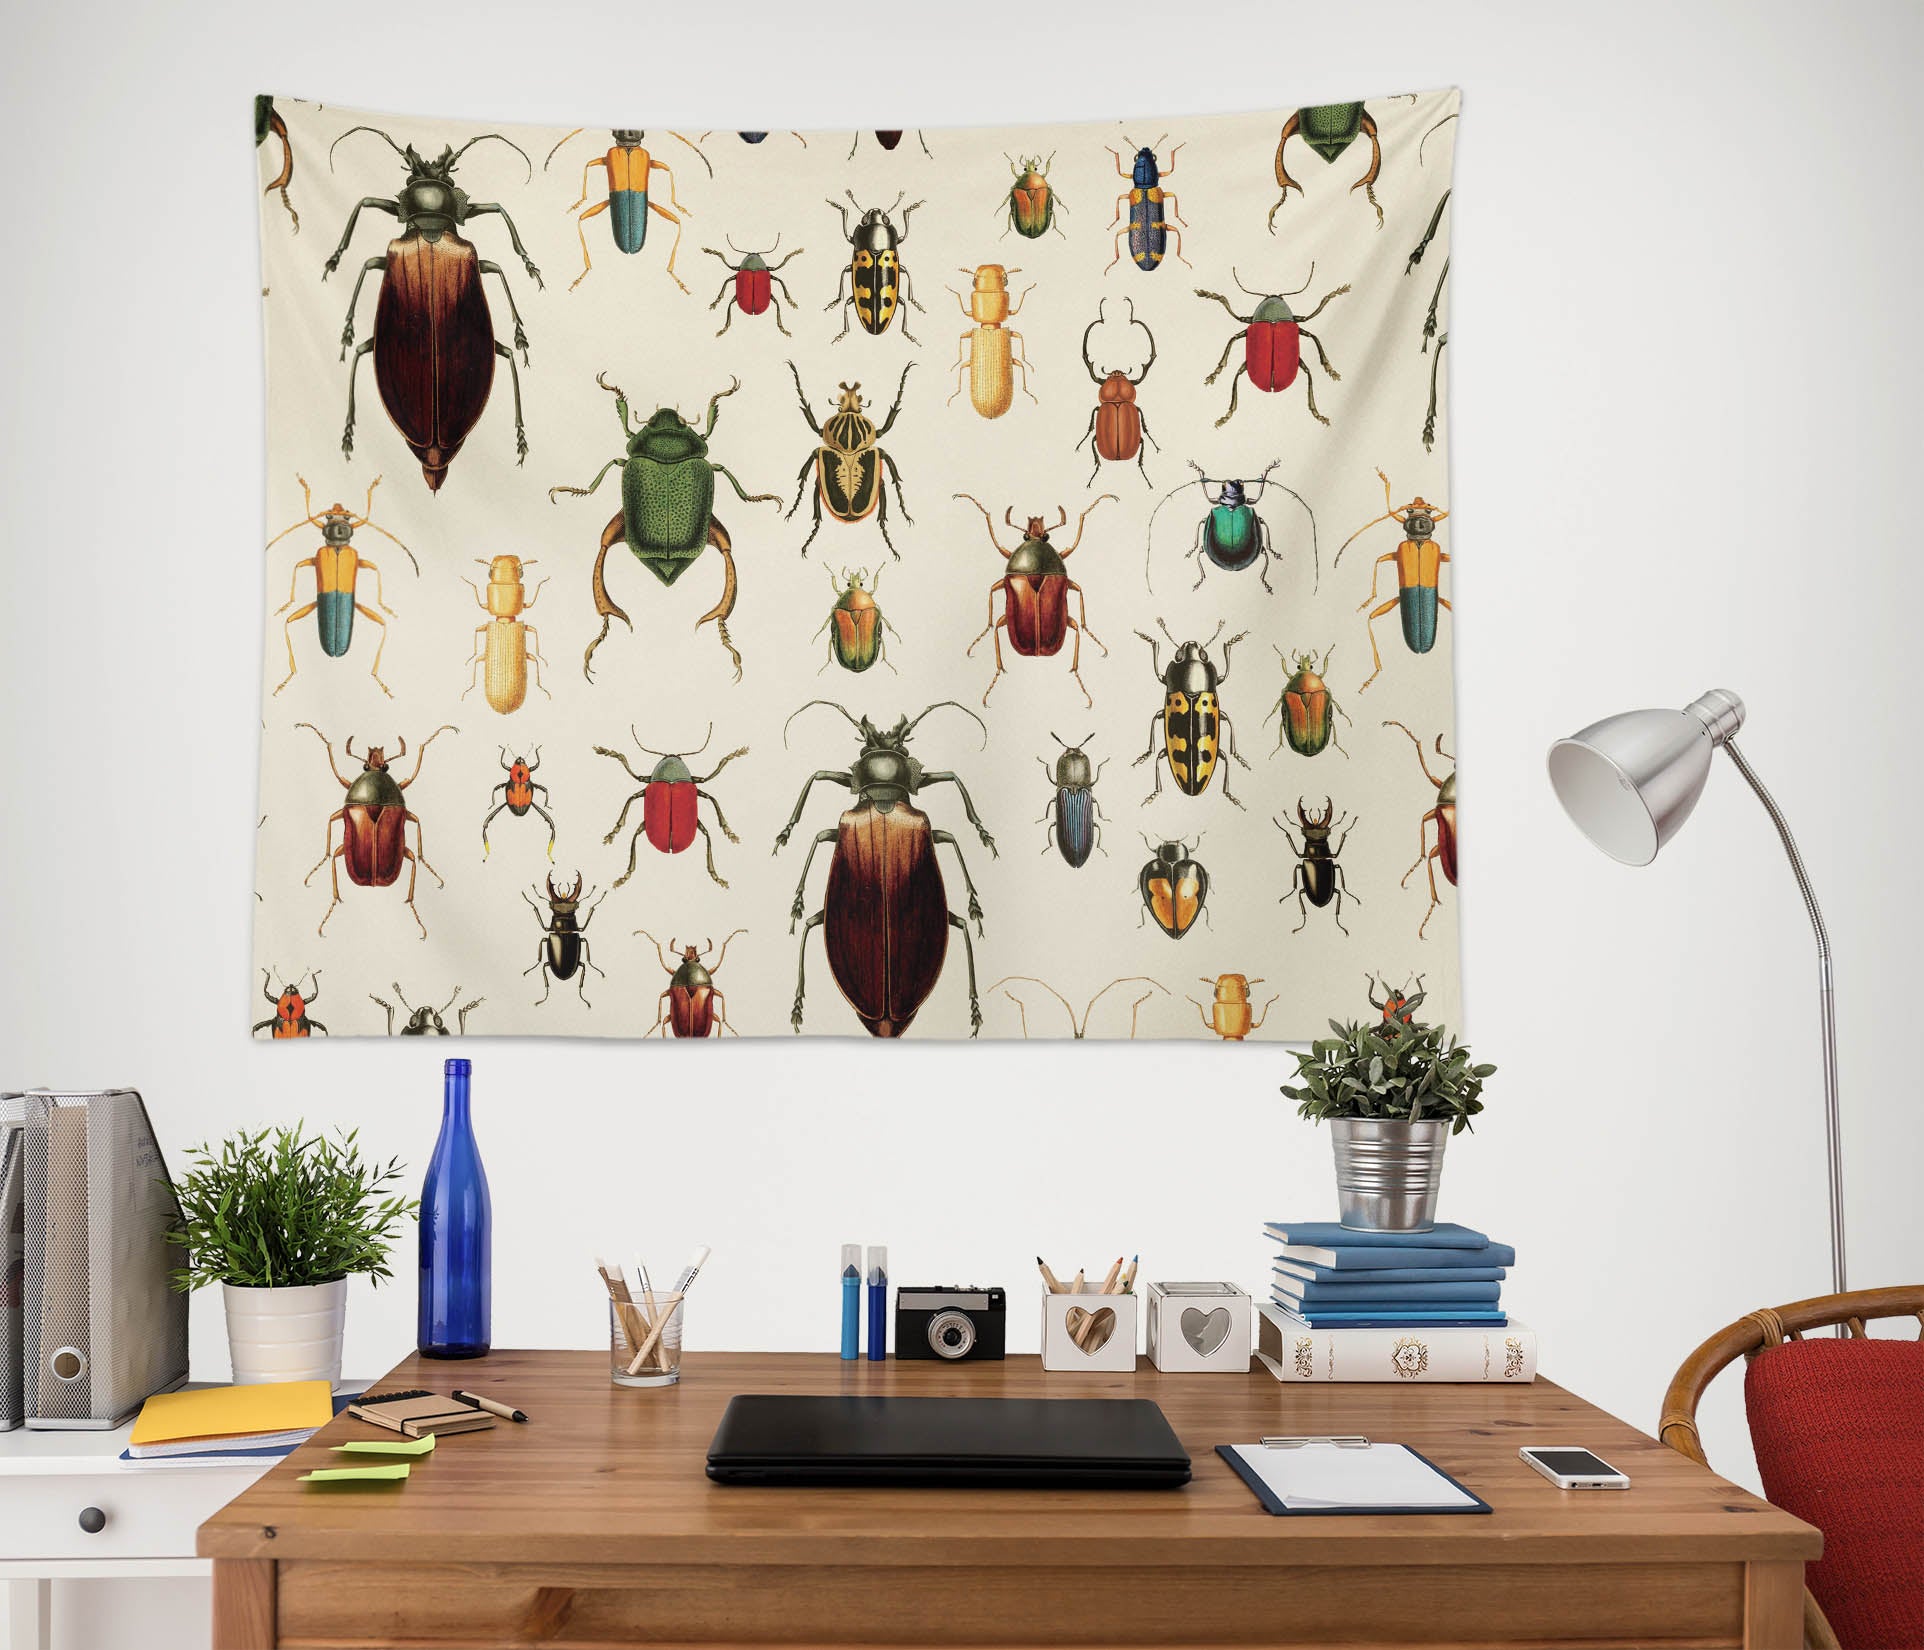 3D Colorful Insects 5330 Uta Naumann Tapestry Hanging Cloth Hang